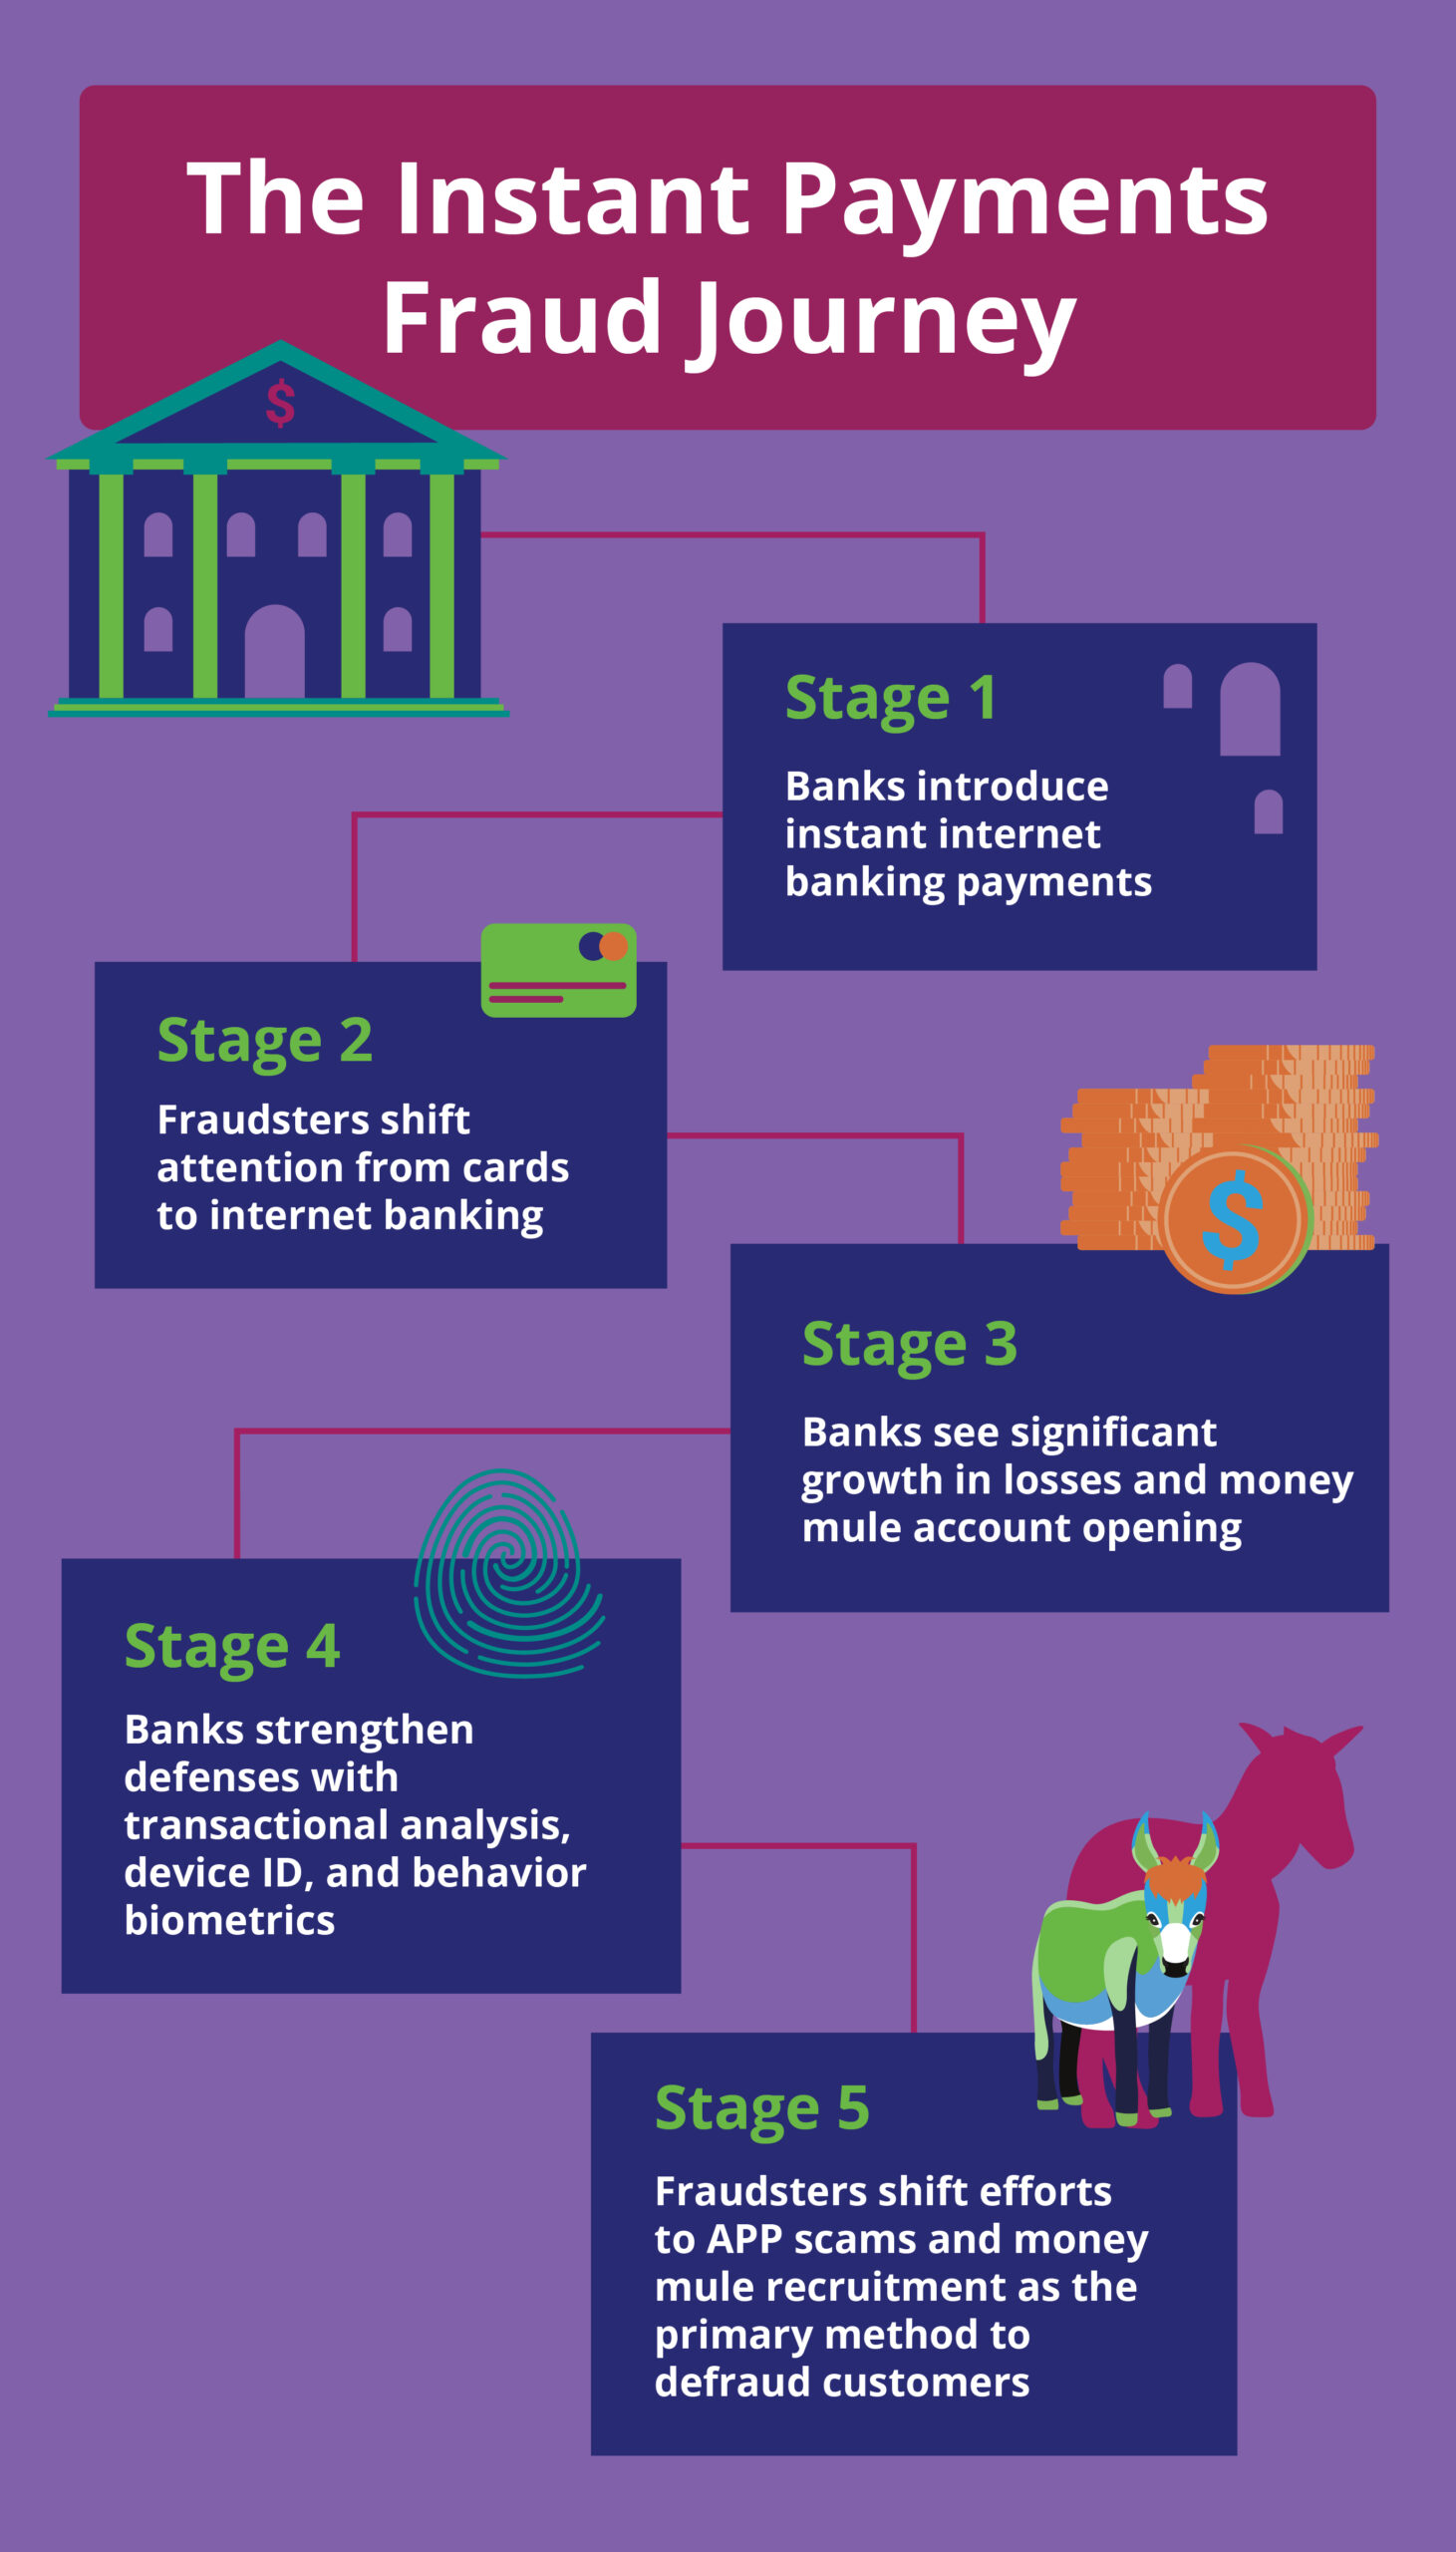 Image outlining 5 stages of Instant Payments Fraud Journey: Stage 1) Banks introduce instant internet banking payments; Stage 2) fraudsters shift attention from cards to internet banking; Stage 3) Banks see significant growth in losses and money mule account opening; Stage 4) Banks strengthen defenses with transactional analysis, device ID, and behavior biometrics; and Stage 5) Fraudsters shift efforts to APP scams and money mule recruitment as they priary method to defraud customers